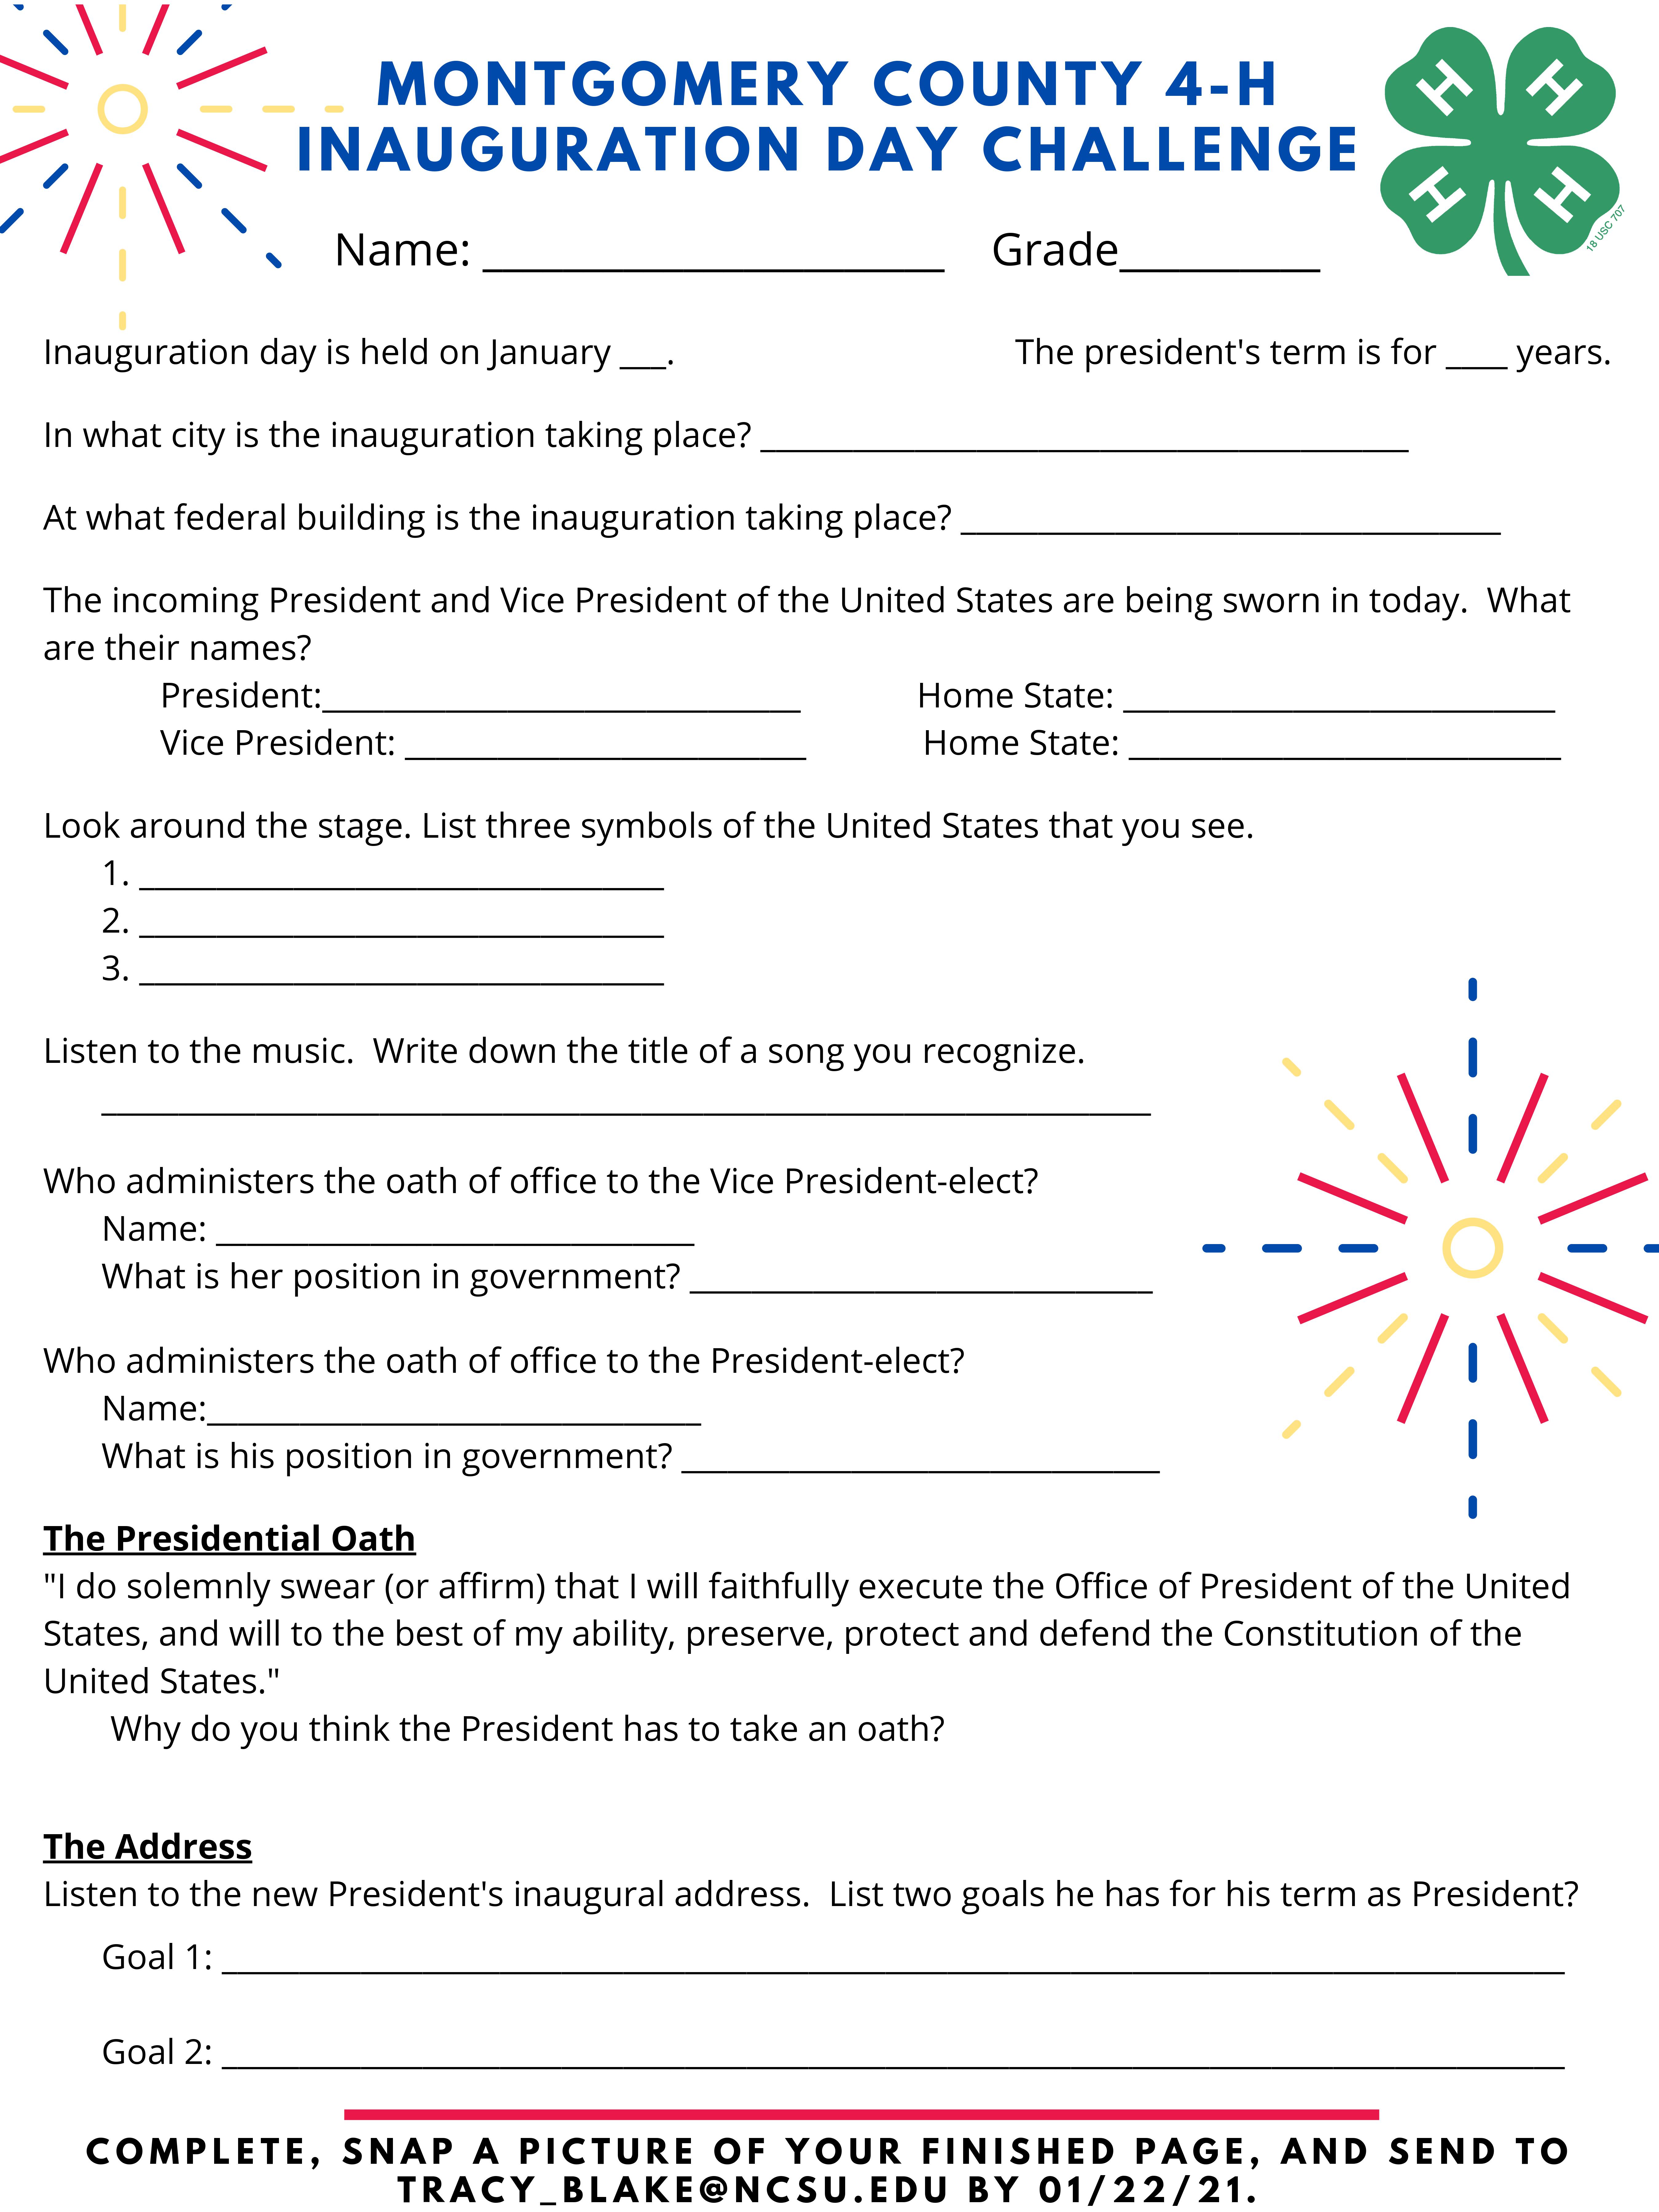 Inauguration Day Challenge flyer